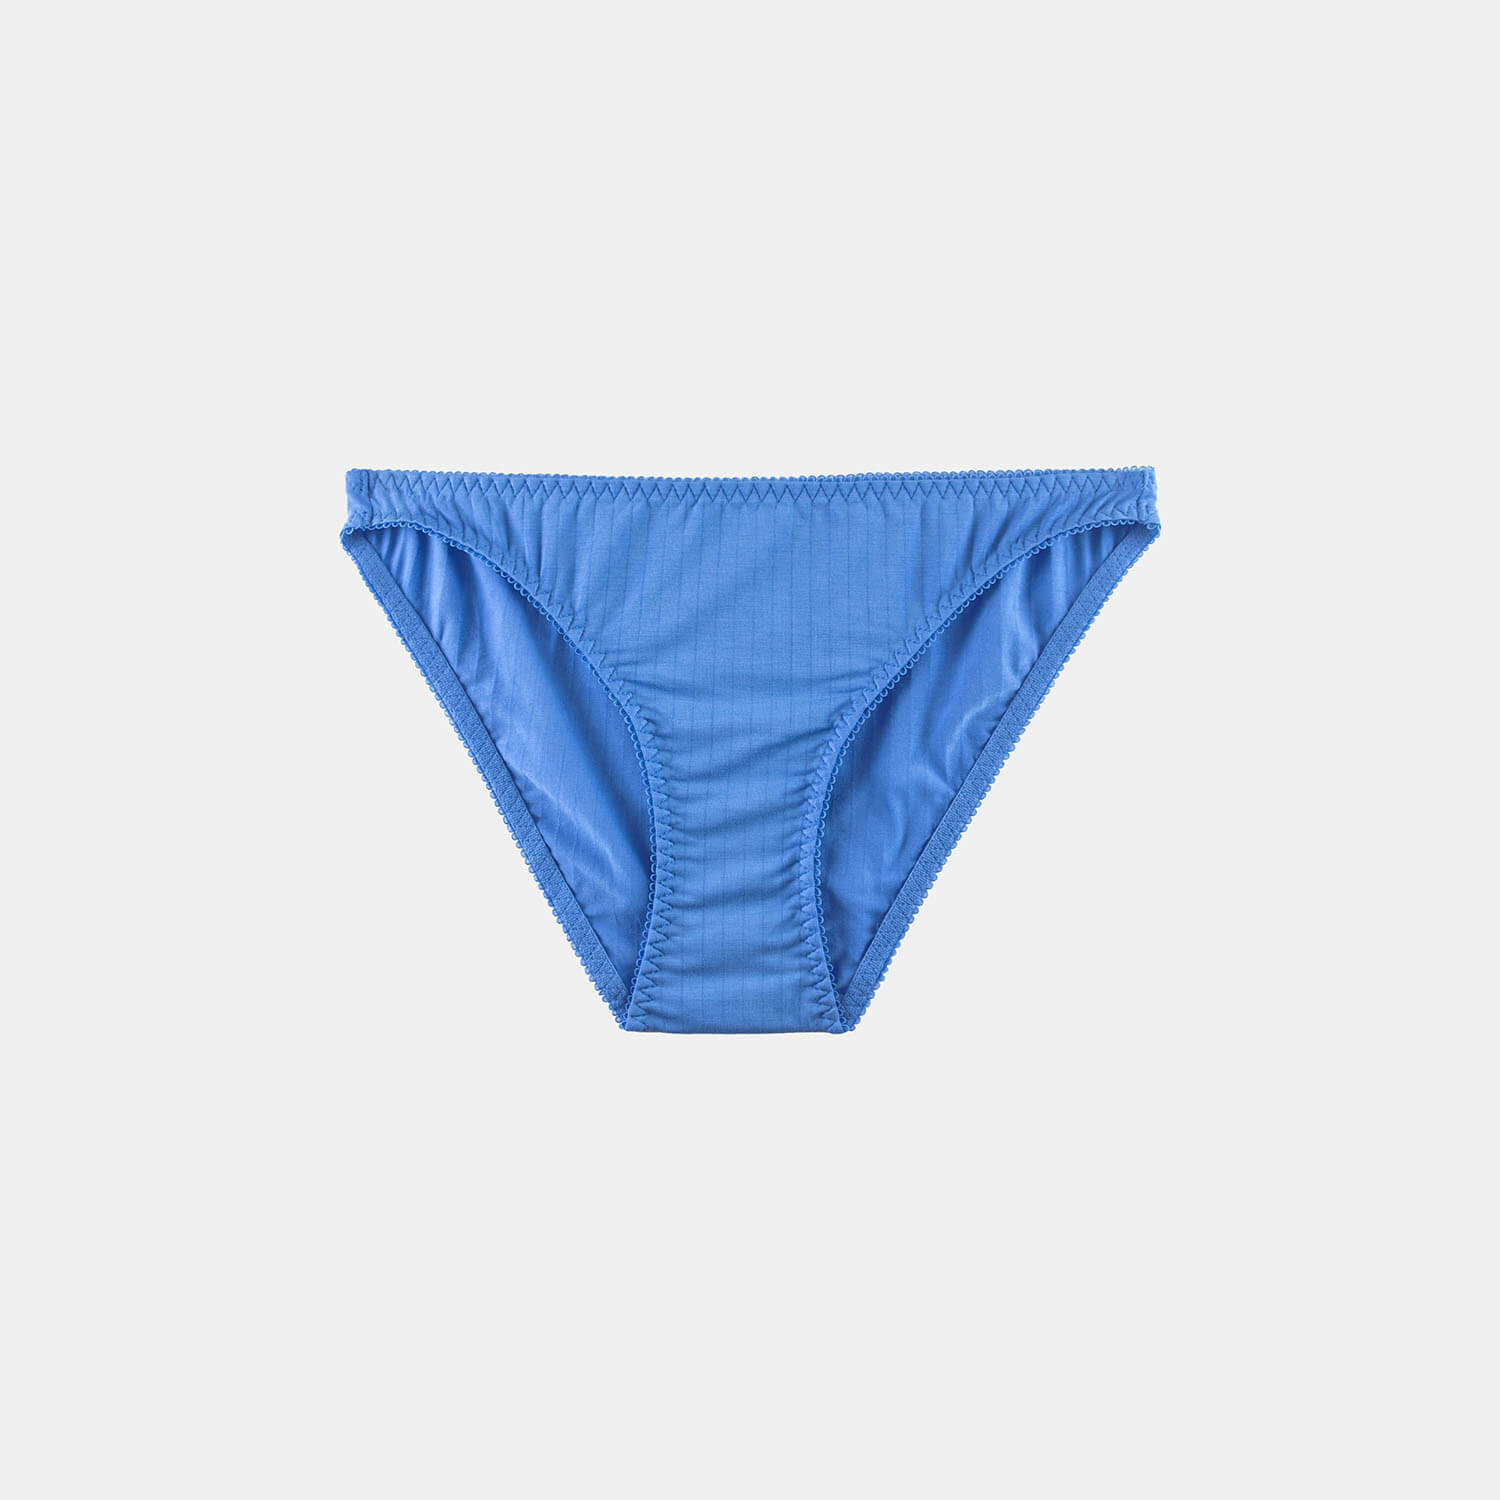 Knickers (color - Blue)